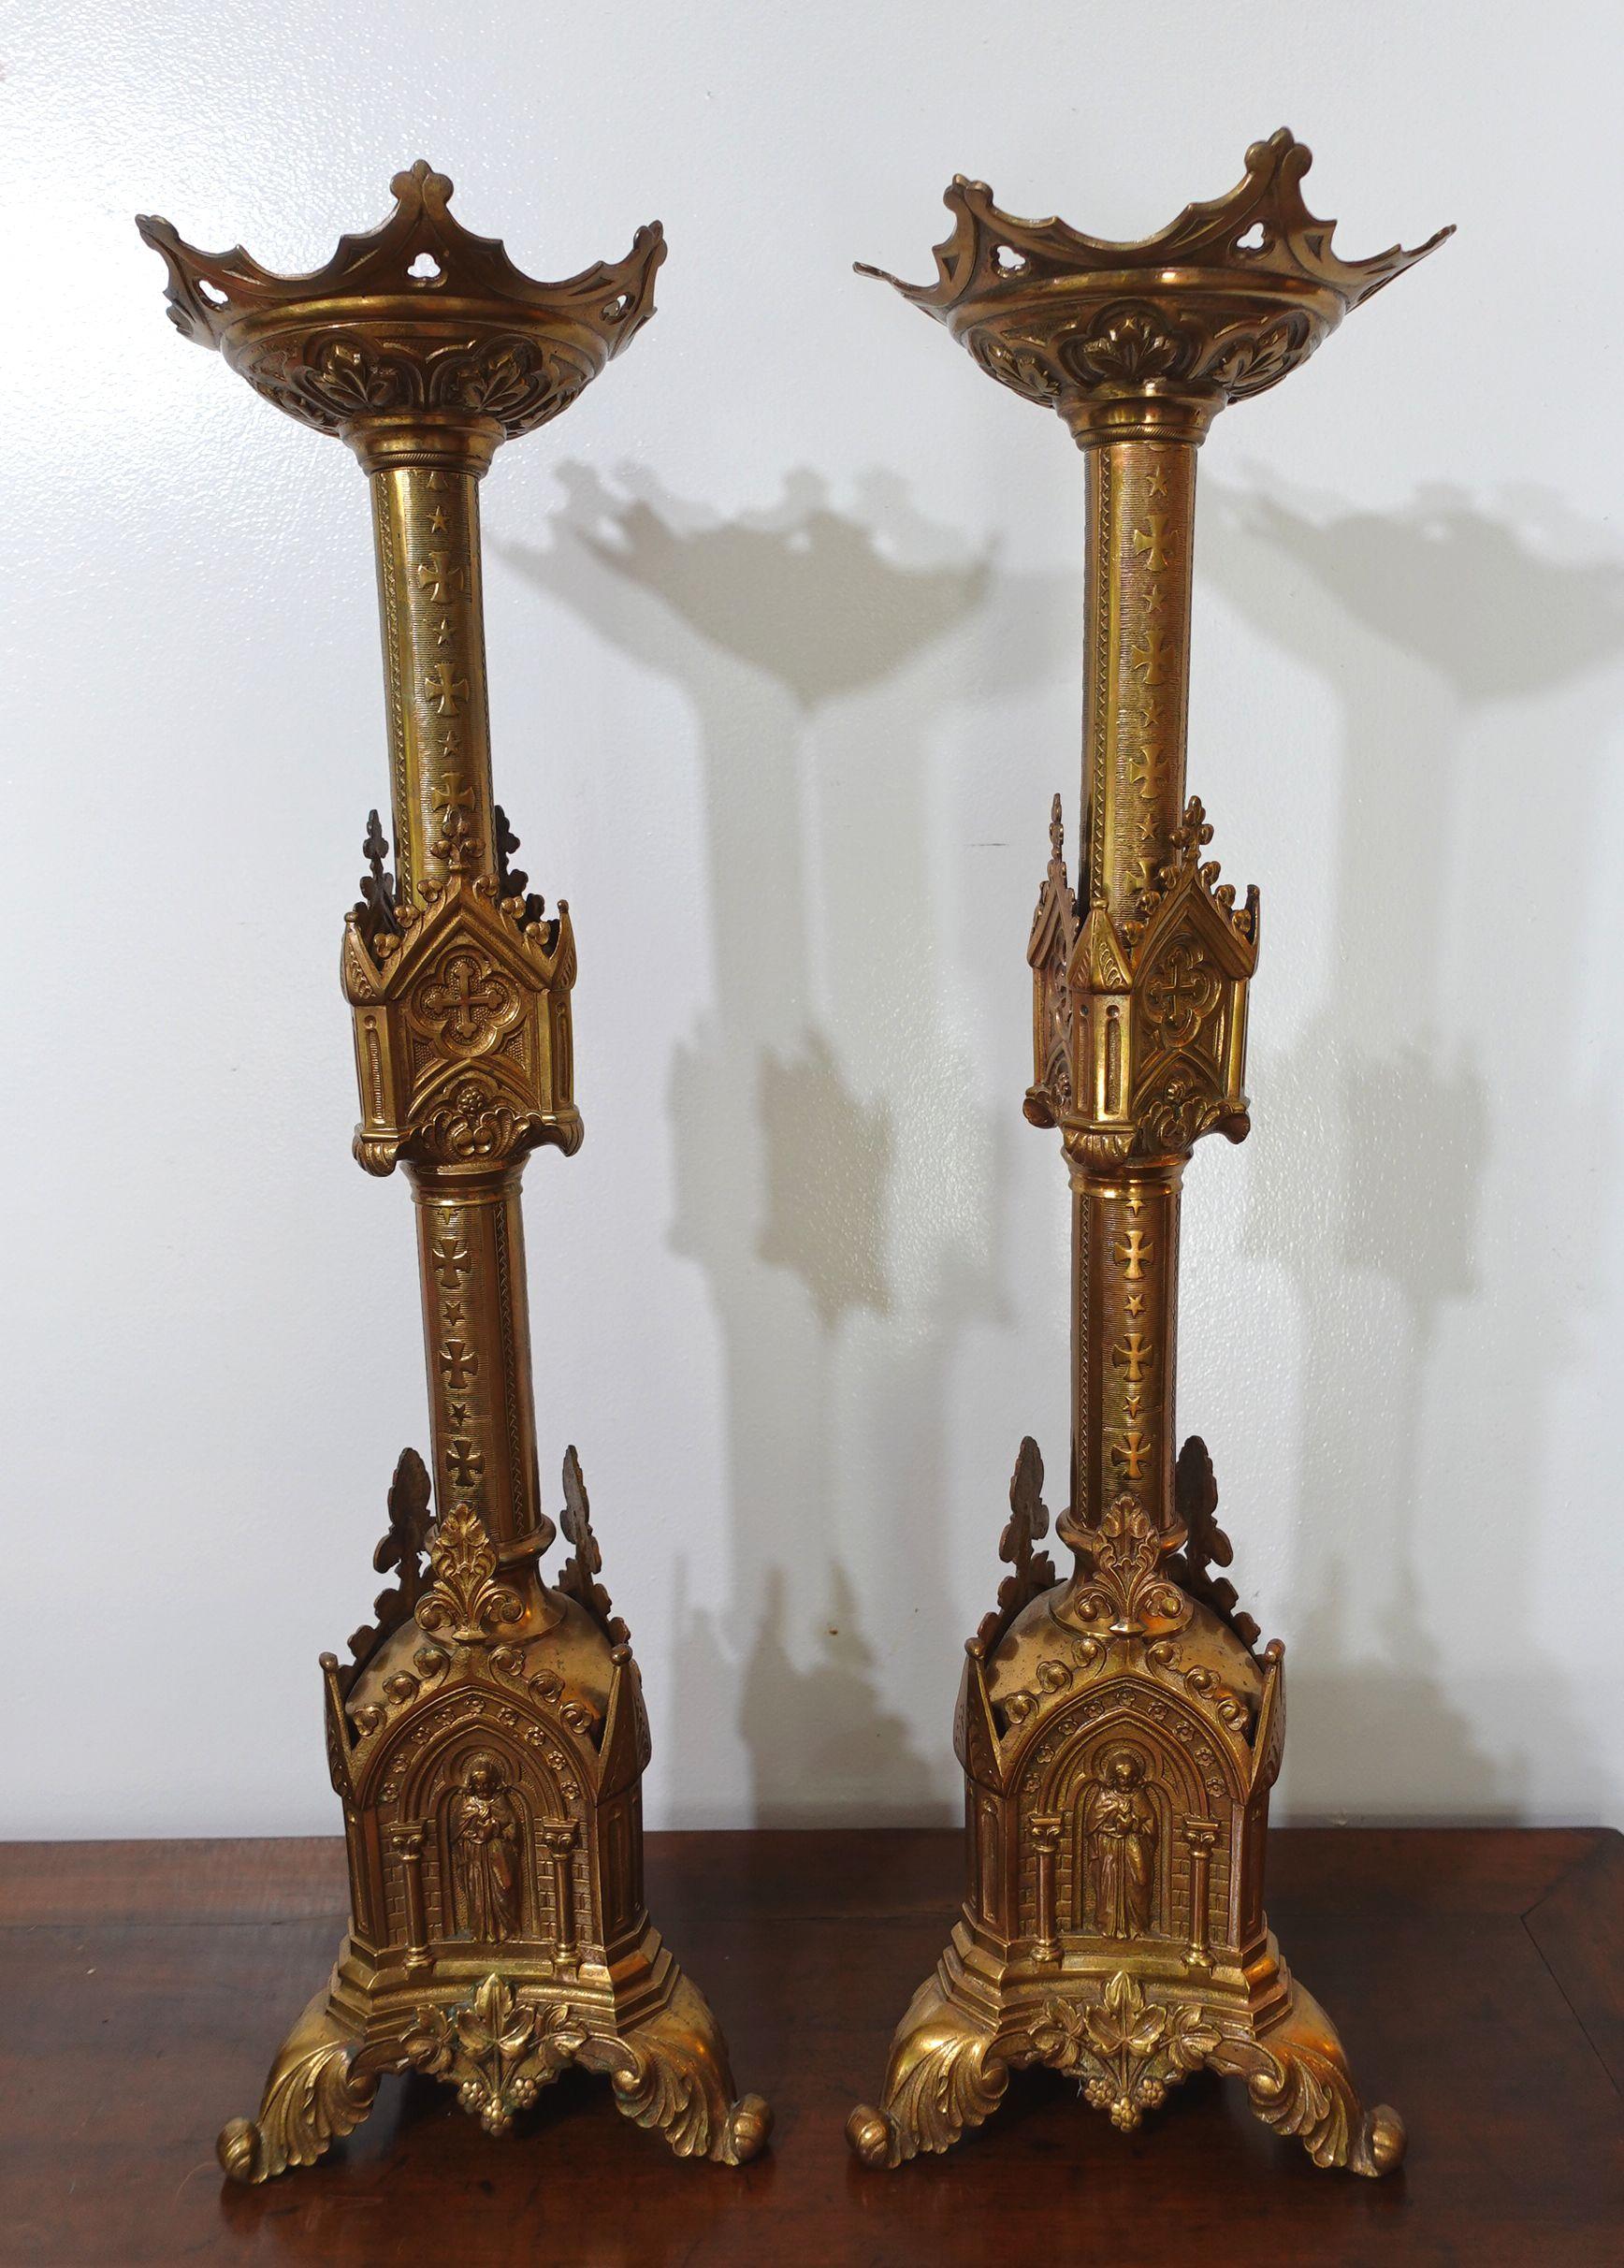 Large Antique Pair of Gothic Cathedral Motif Brass Prickets - Church/Altar candlesticks with gothic architectural design elements.
Ric.0044.
 